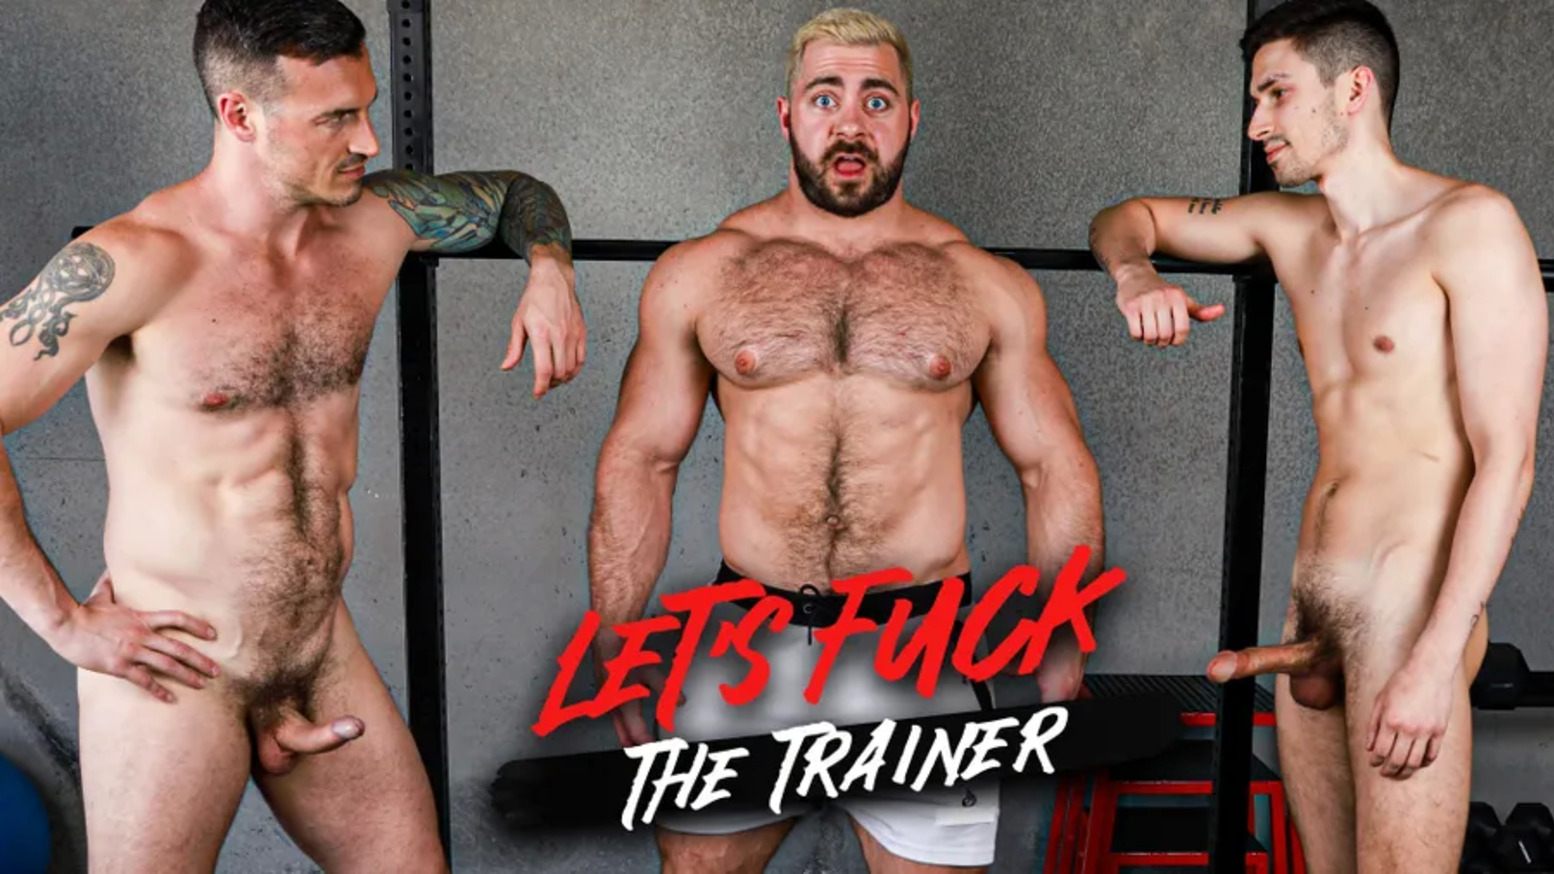 Let's Fuck The Trainer